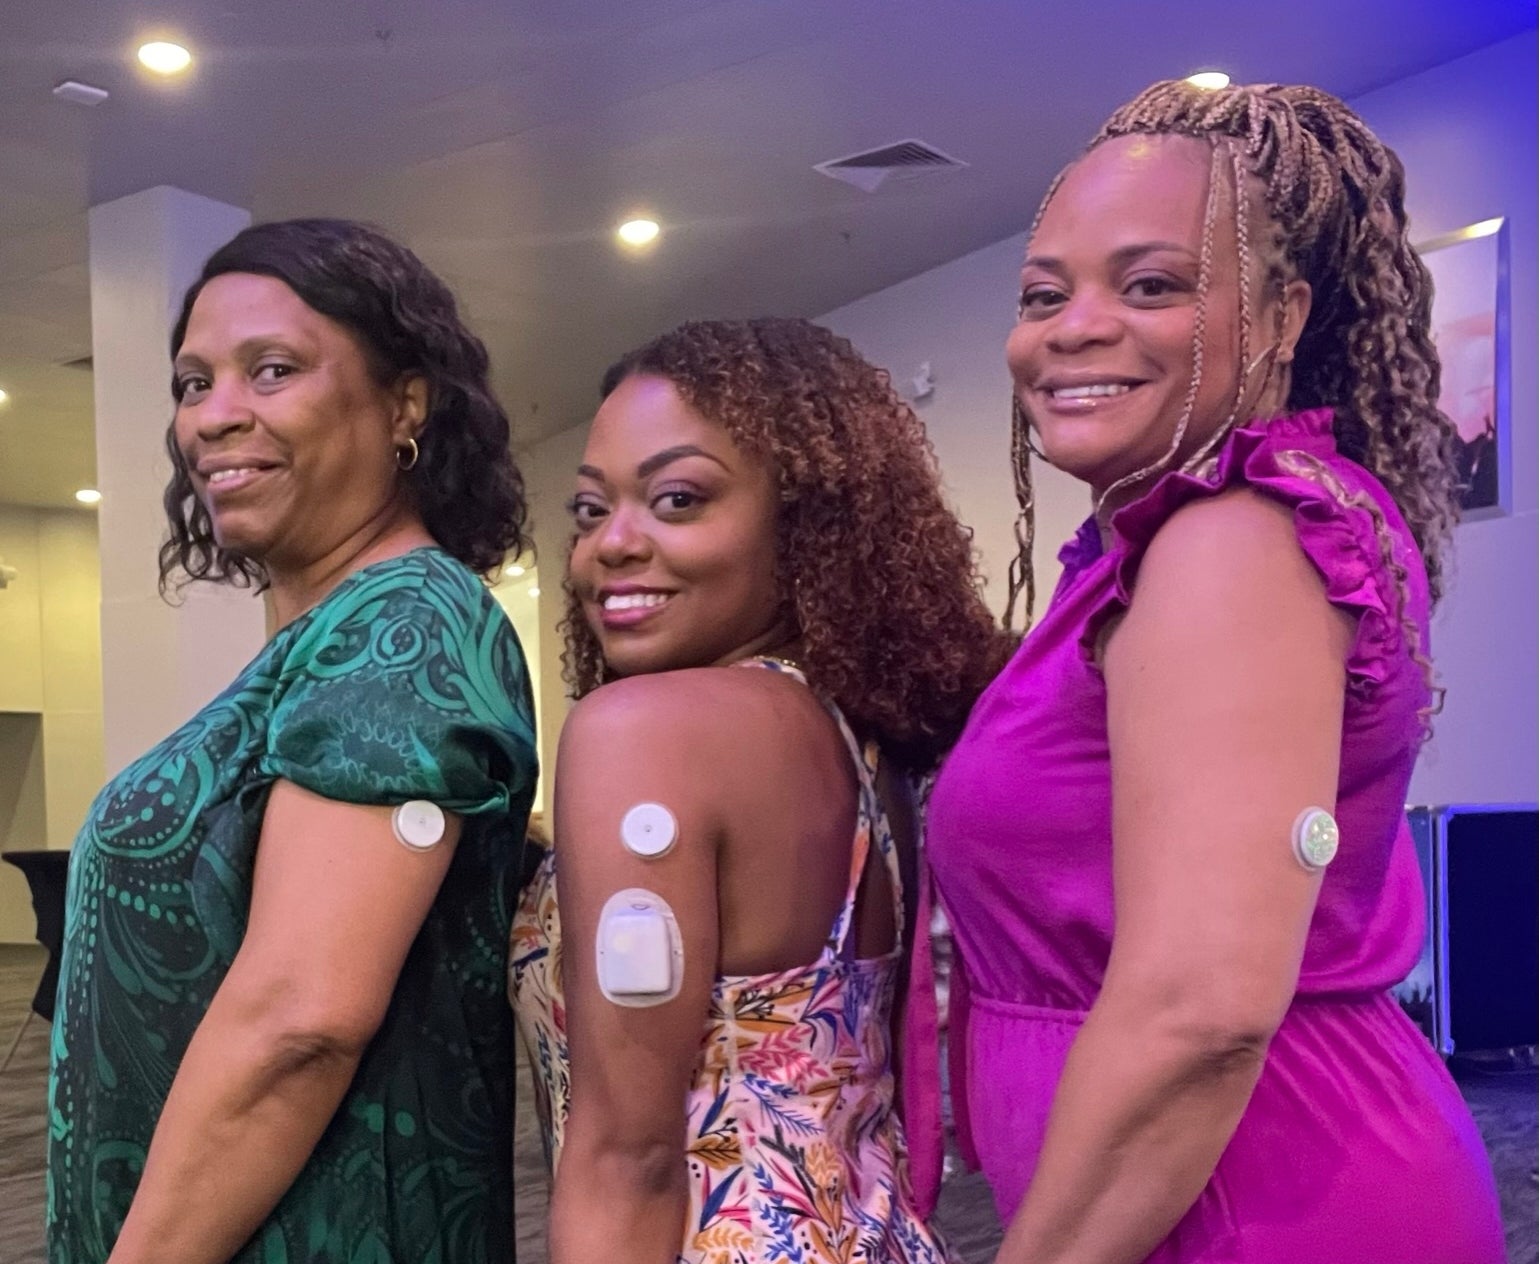 Three Generations Of Women Bond Over Their Shared Diabetes Diagnoses